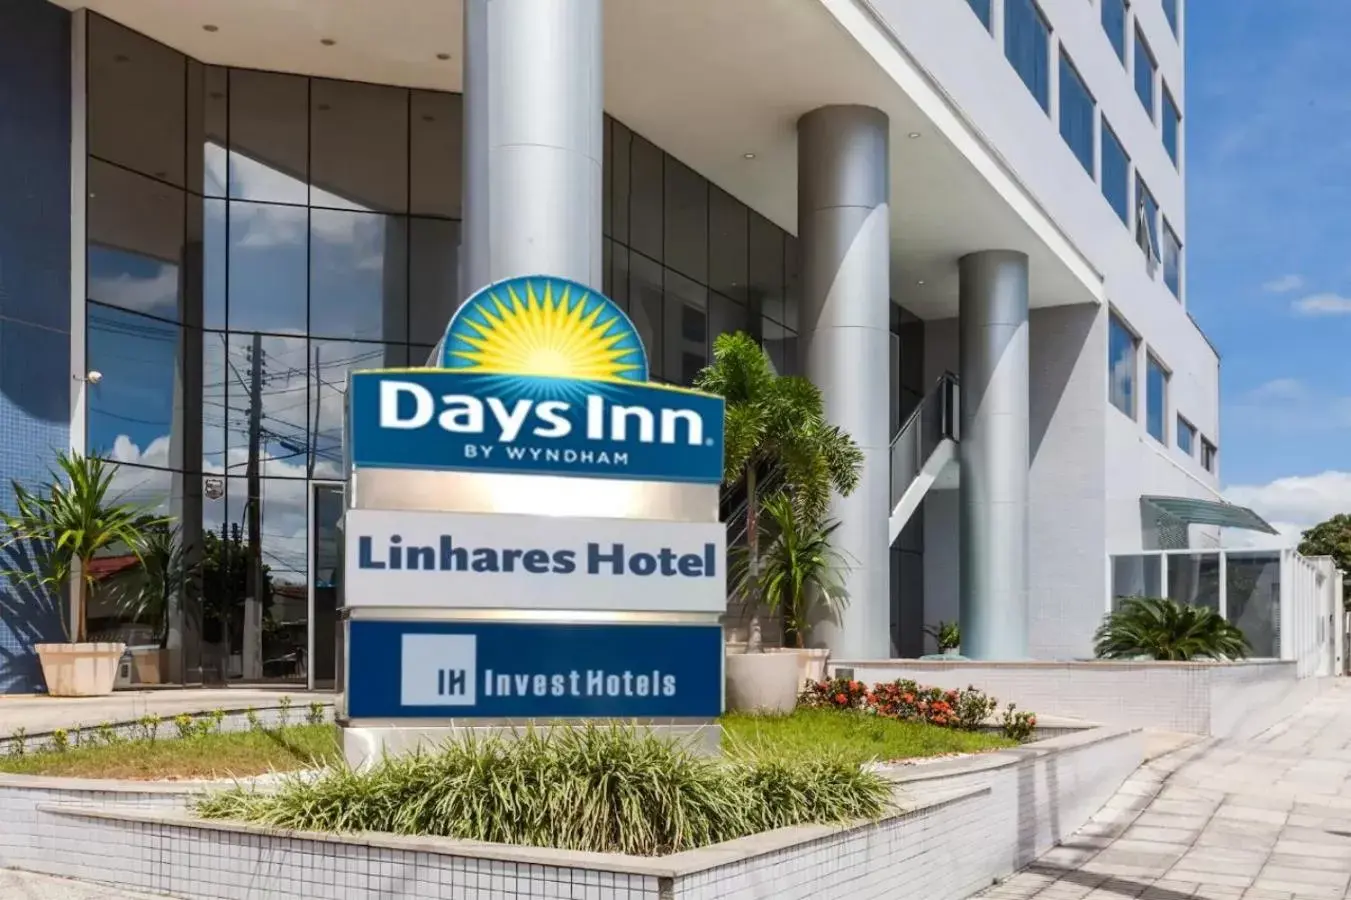 Facade/entrance, Property Building in Days Inn by Wyndham Linhares